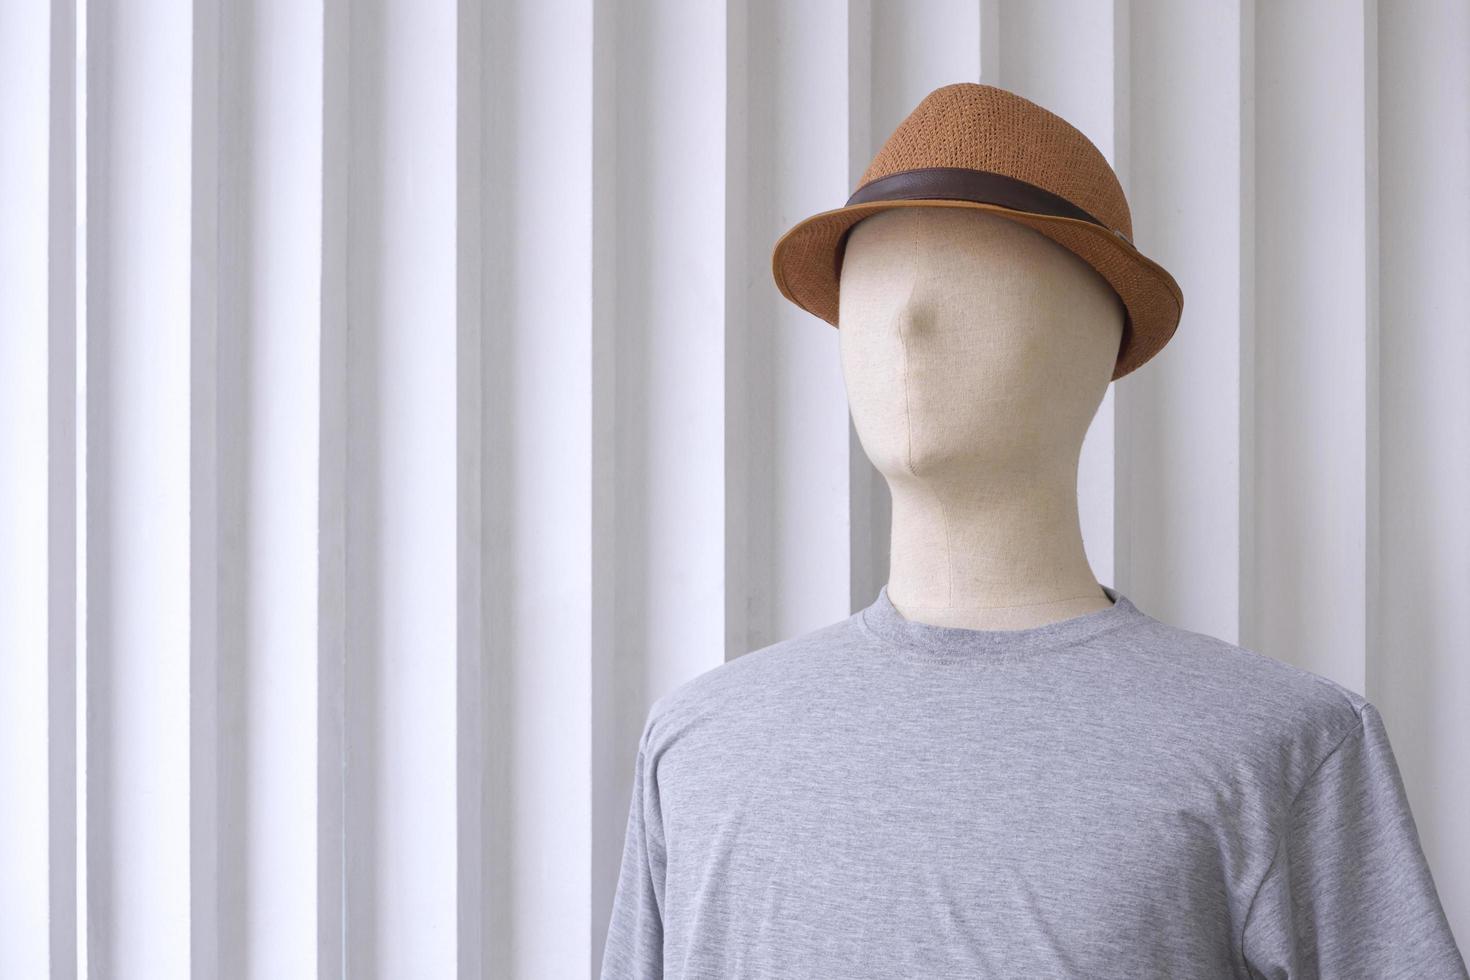 Male mannequin in gray t-shirt with fedora hat on white wooden wall background photo